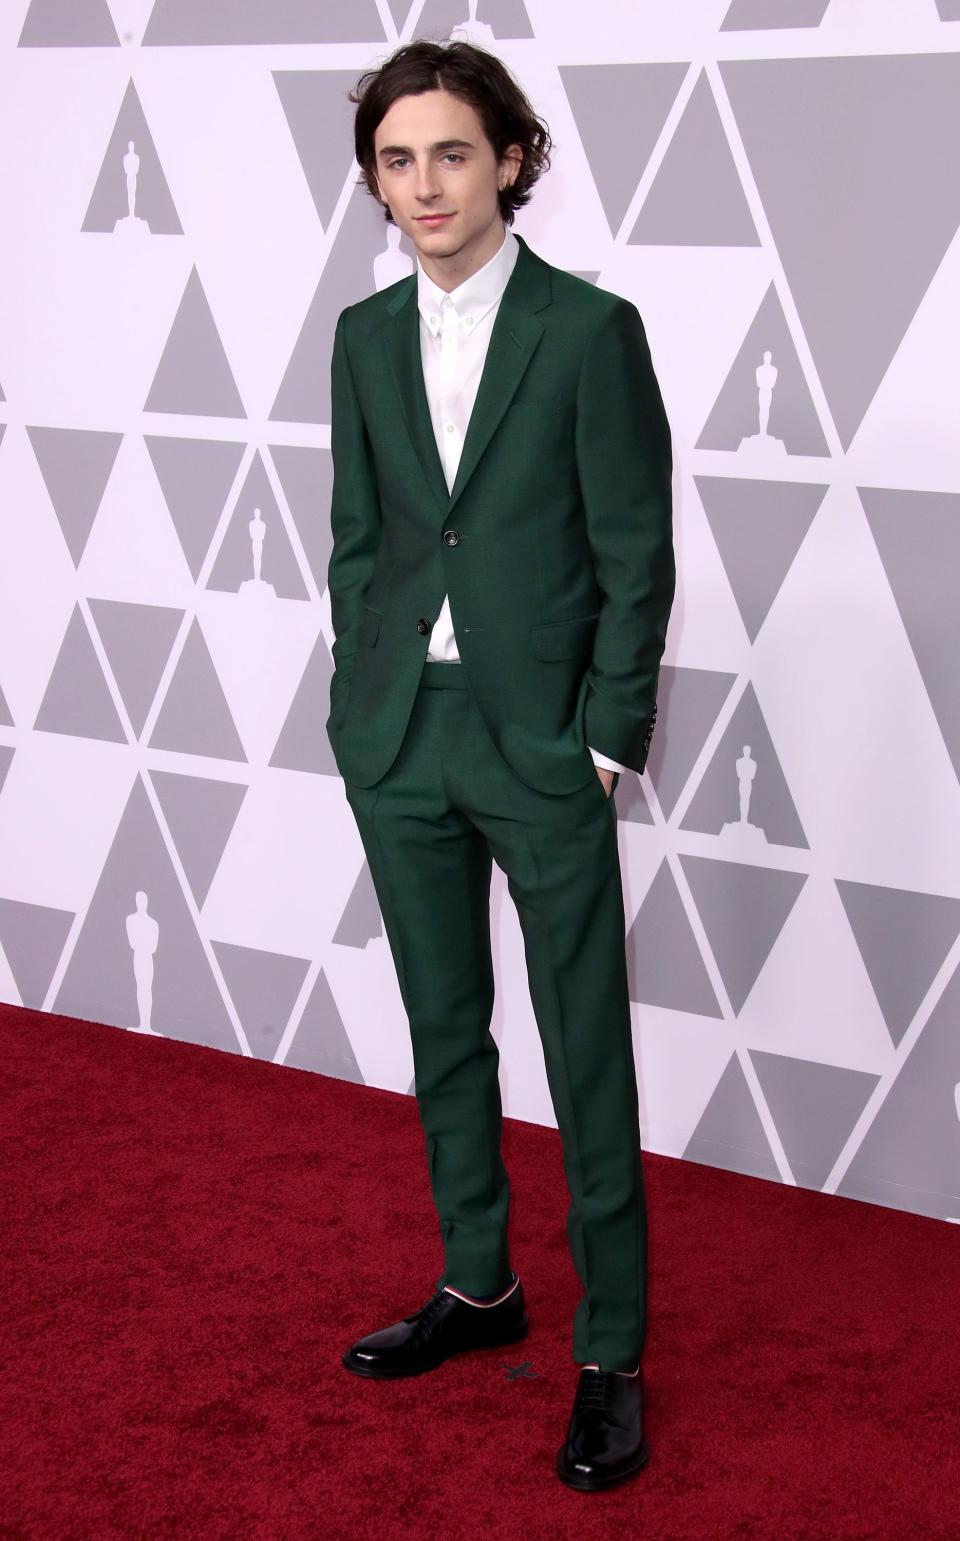 Timothée Chalamet attends the 90th Annual Academy Awards Nominee Luncheon